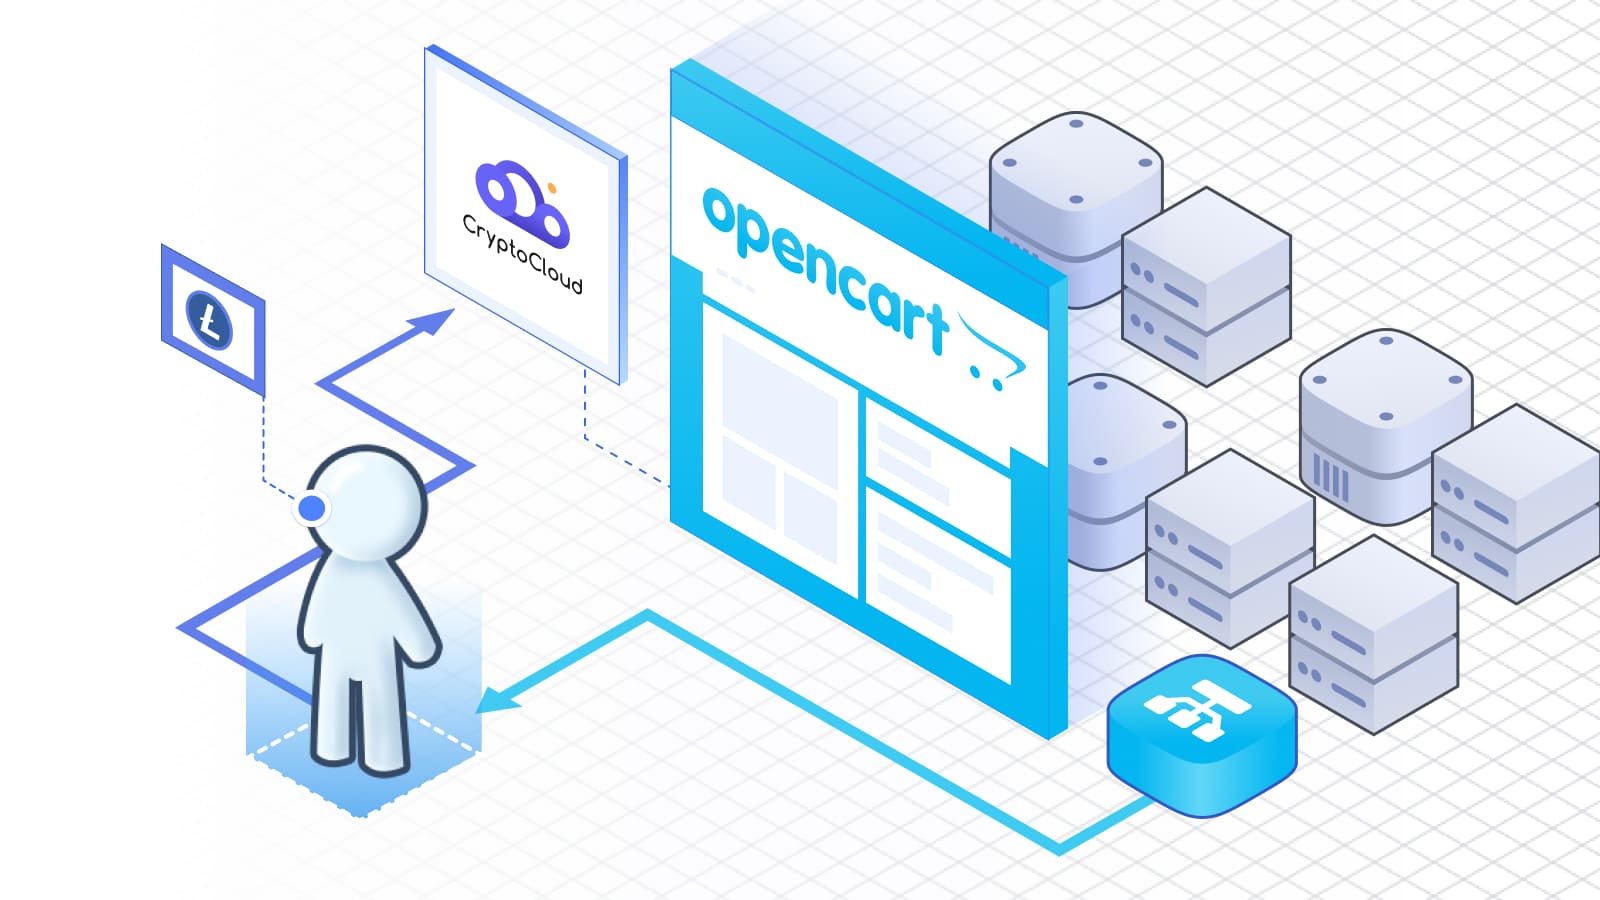 OpenCart functions as an online solution for creating custom e-stores.